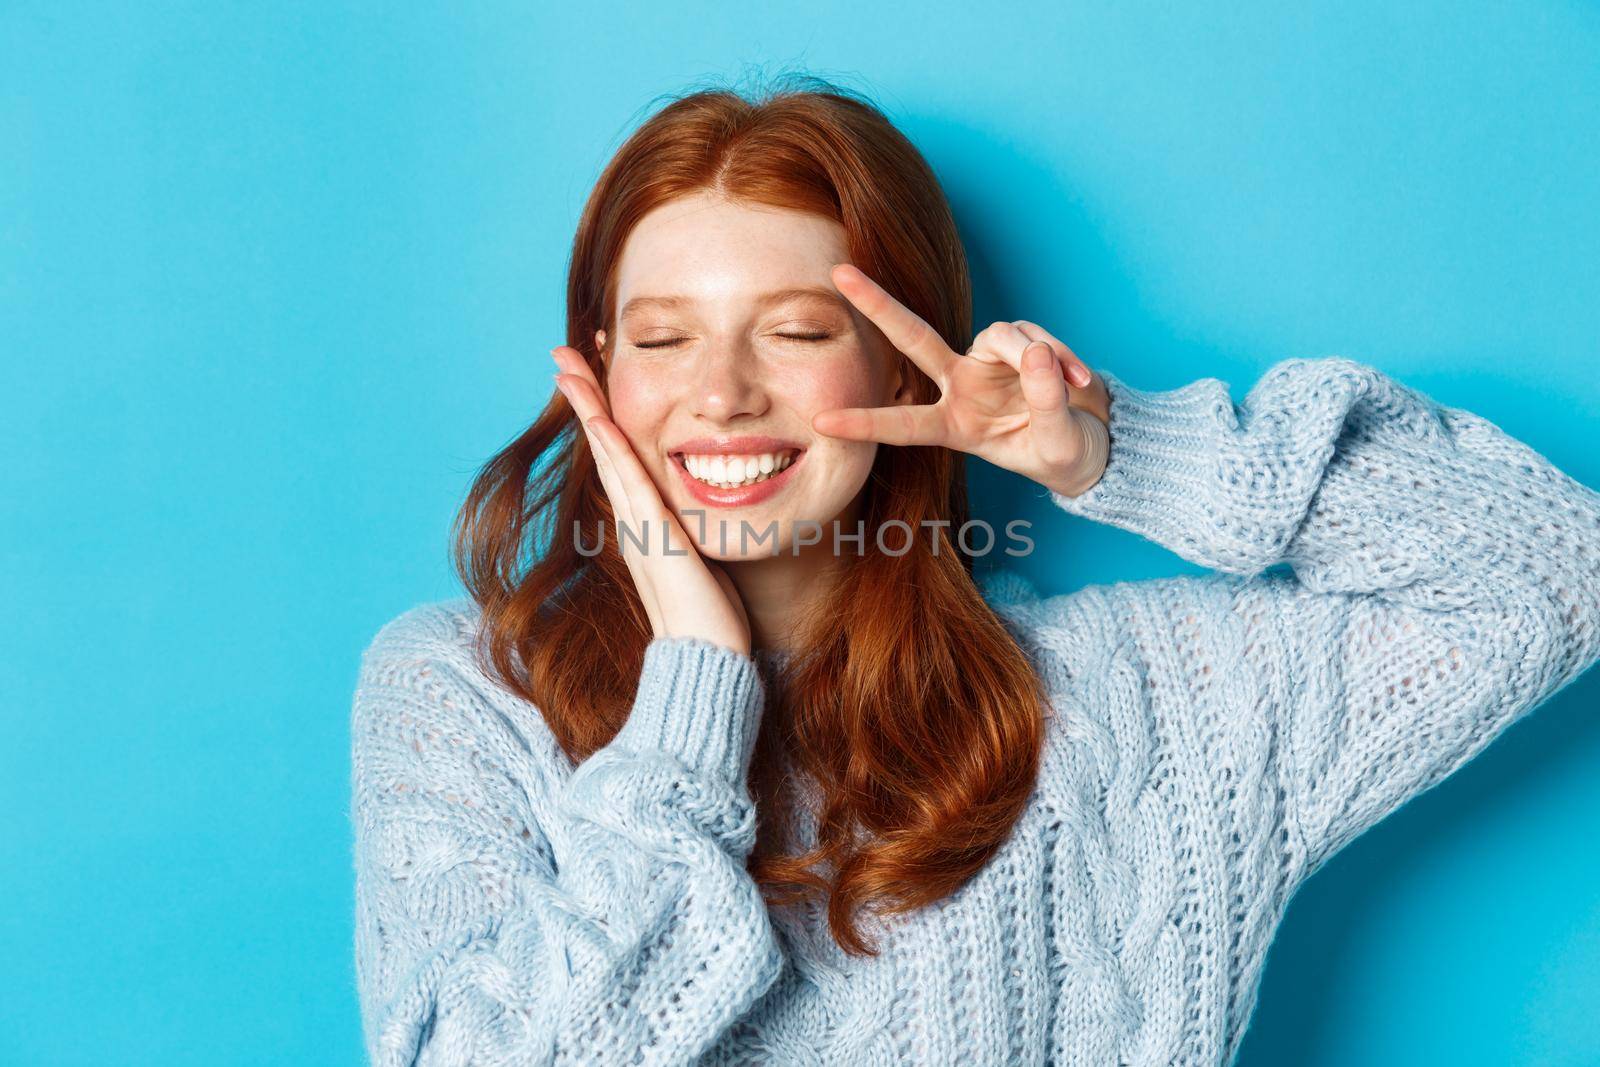 Close-up of beautiful smiling girl with red hair, showing peace kawaii sign, standing with eyes closed over blue background.